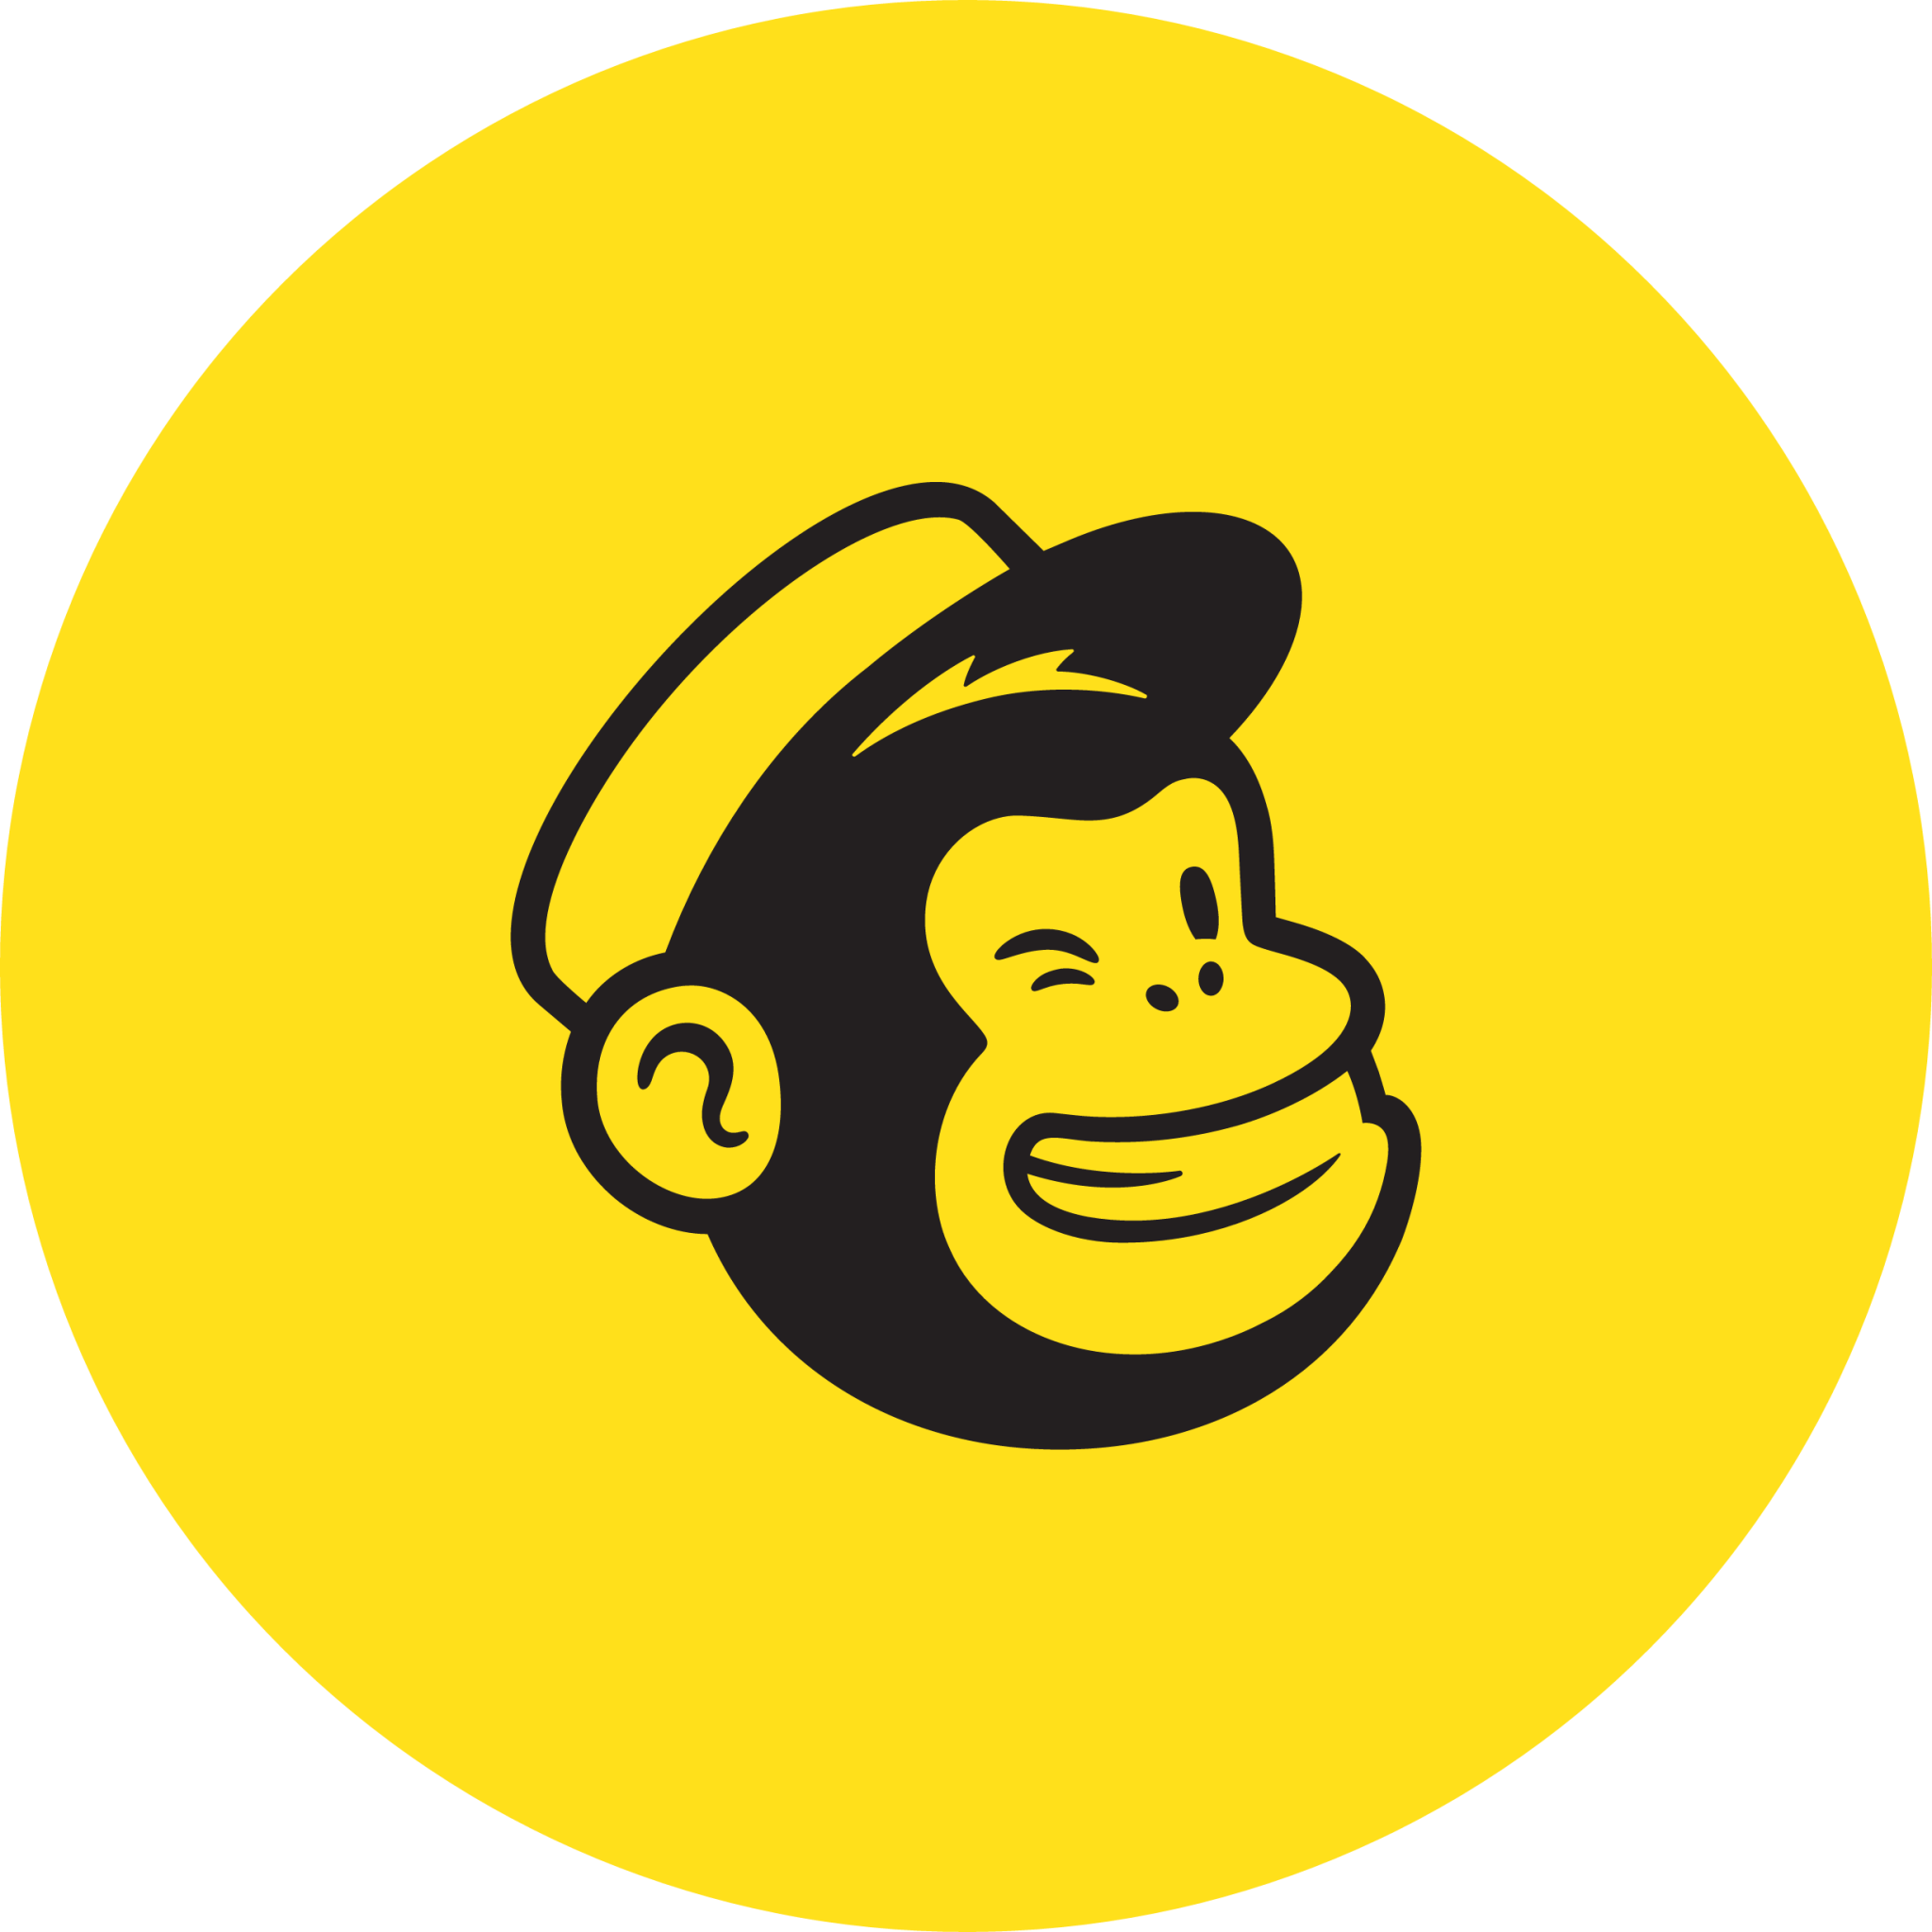 Mailchimp" Icon - Download for free – Iconduck